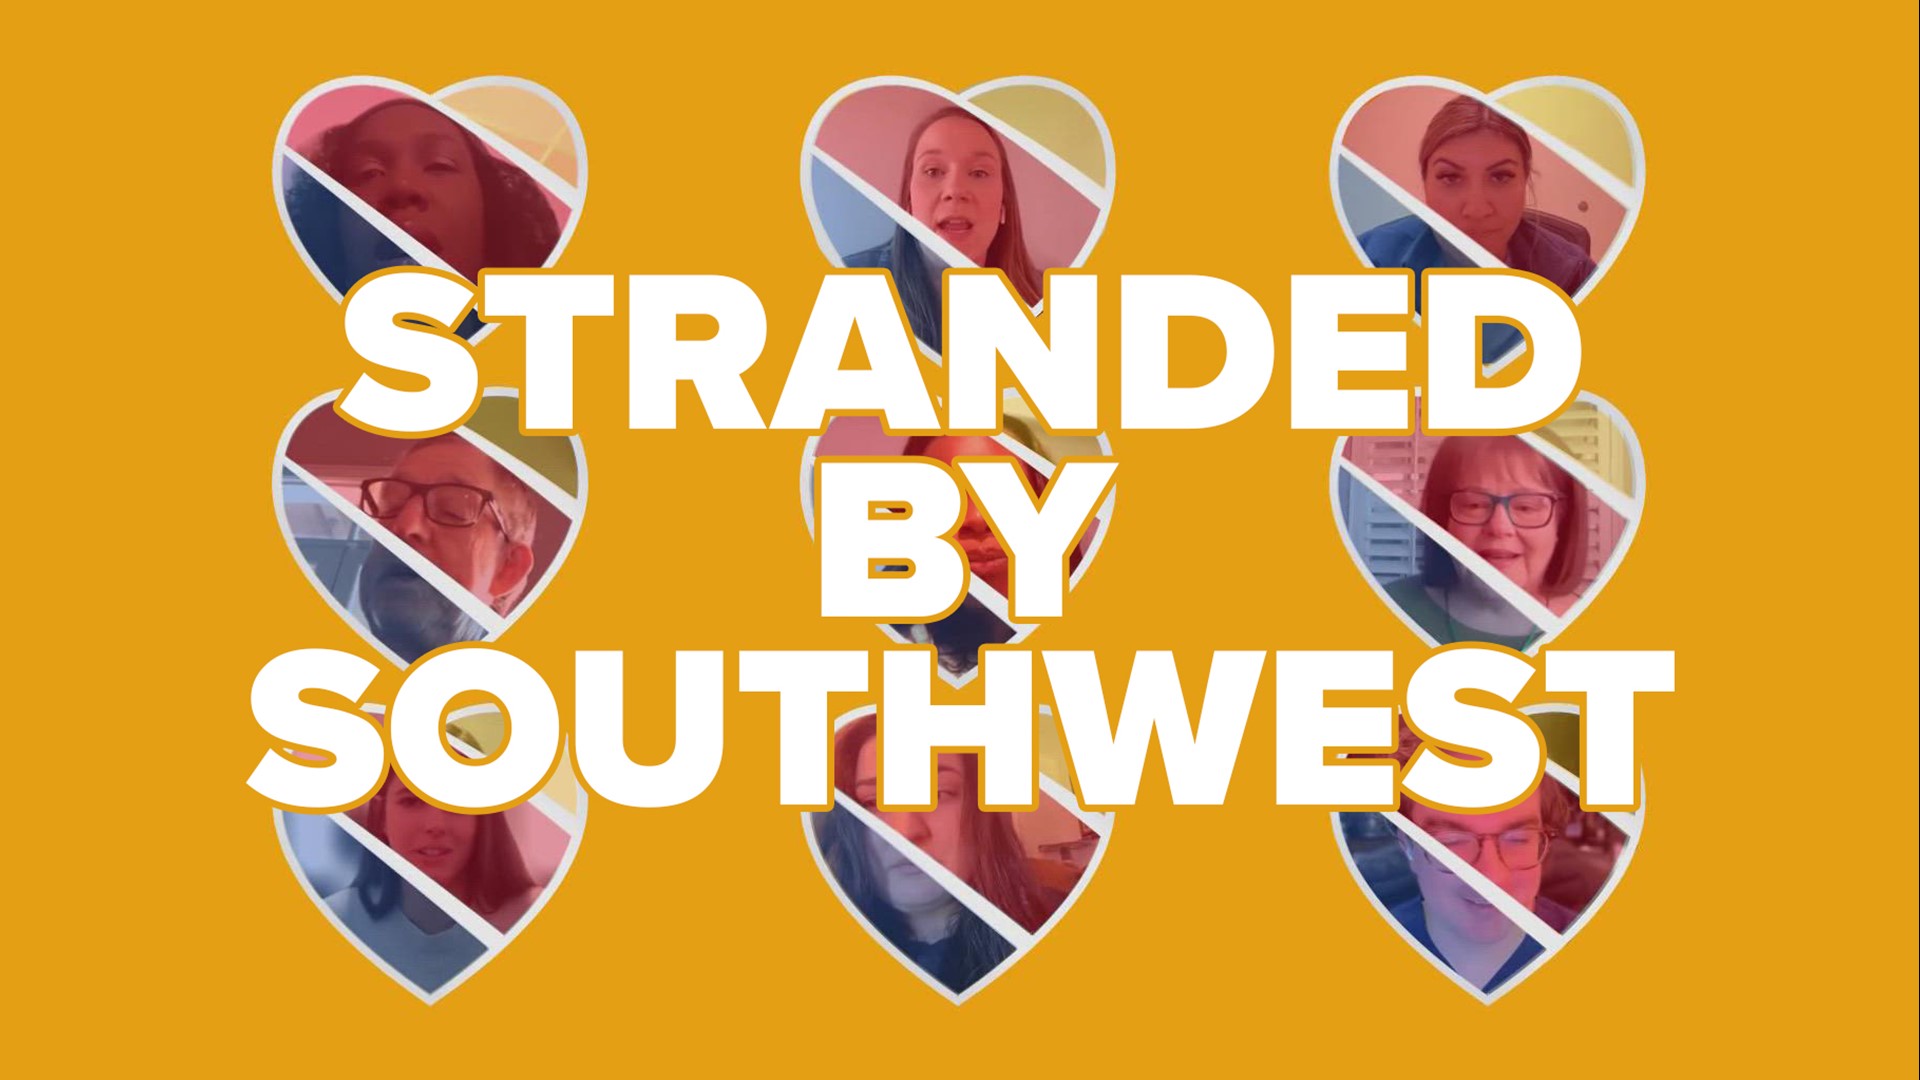 Frustrated Southwest customers share stories of heartbreak, missed memories stemming from Southwest Airlines cancelling their flights and losing their luggage.